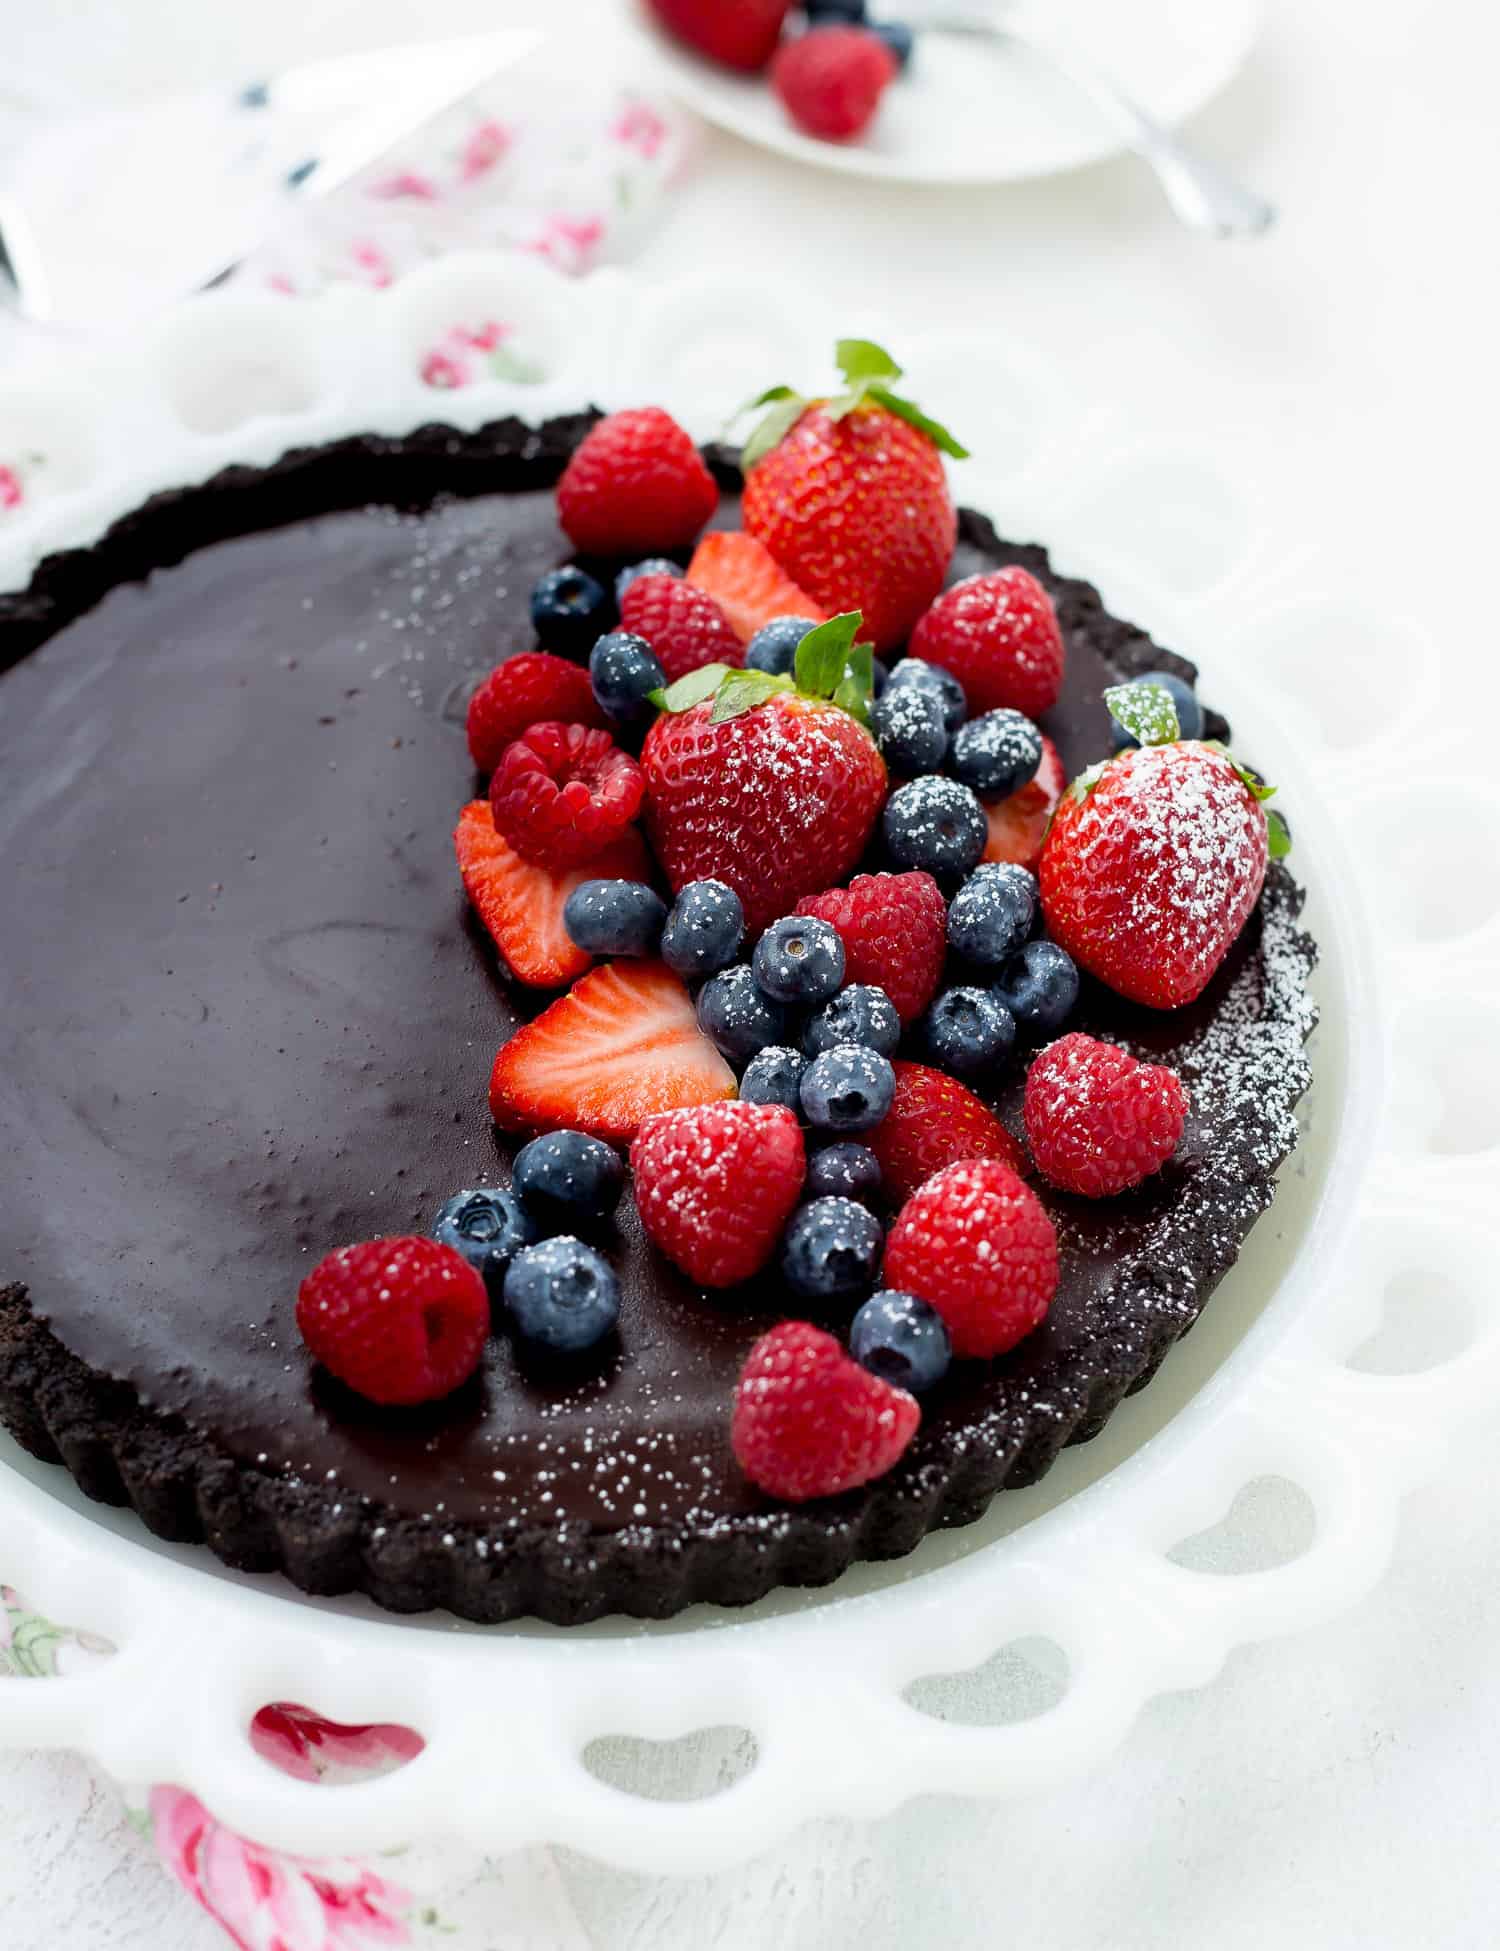 Chocolate tart topped with fresh berries and powdered sugar.